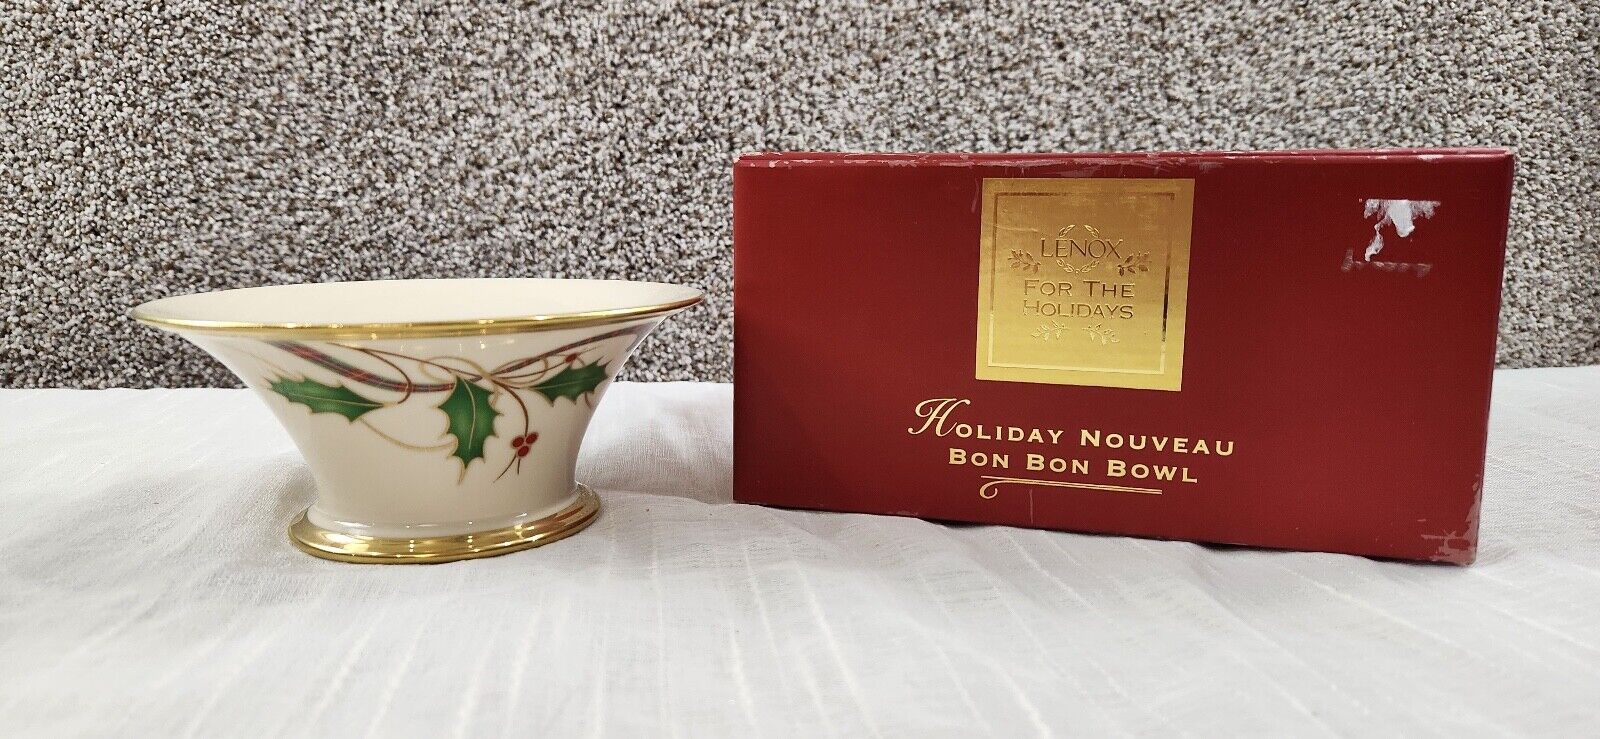 Lenox for the Holidays Holiday Nouveau Bon Bon Bowl Christmas Candy Dish in Box